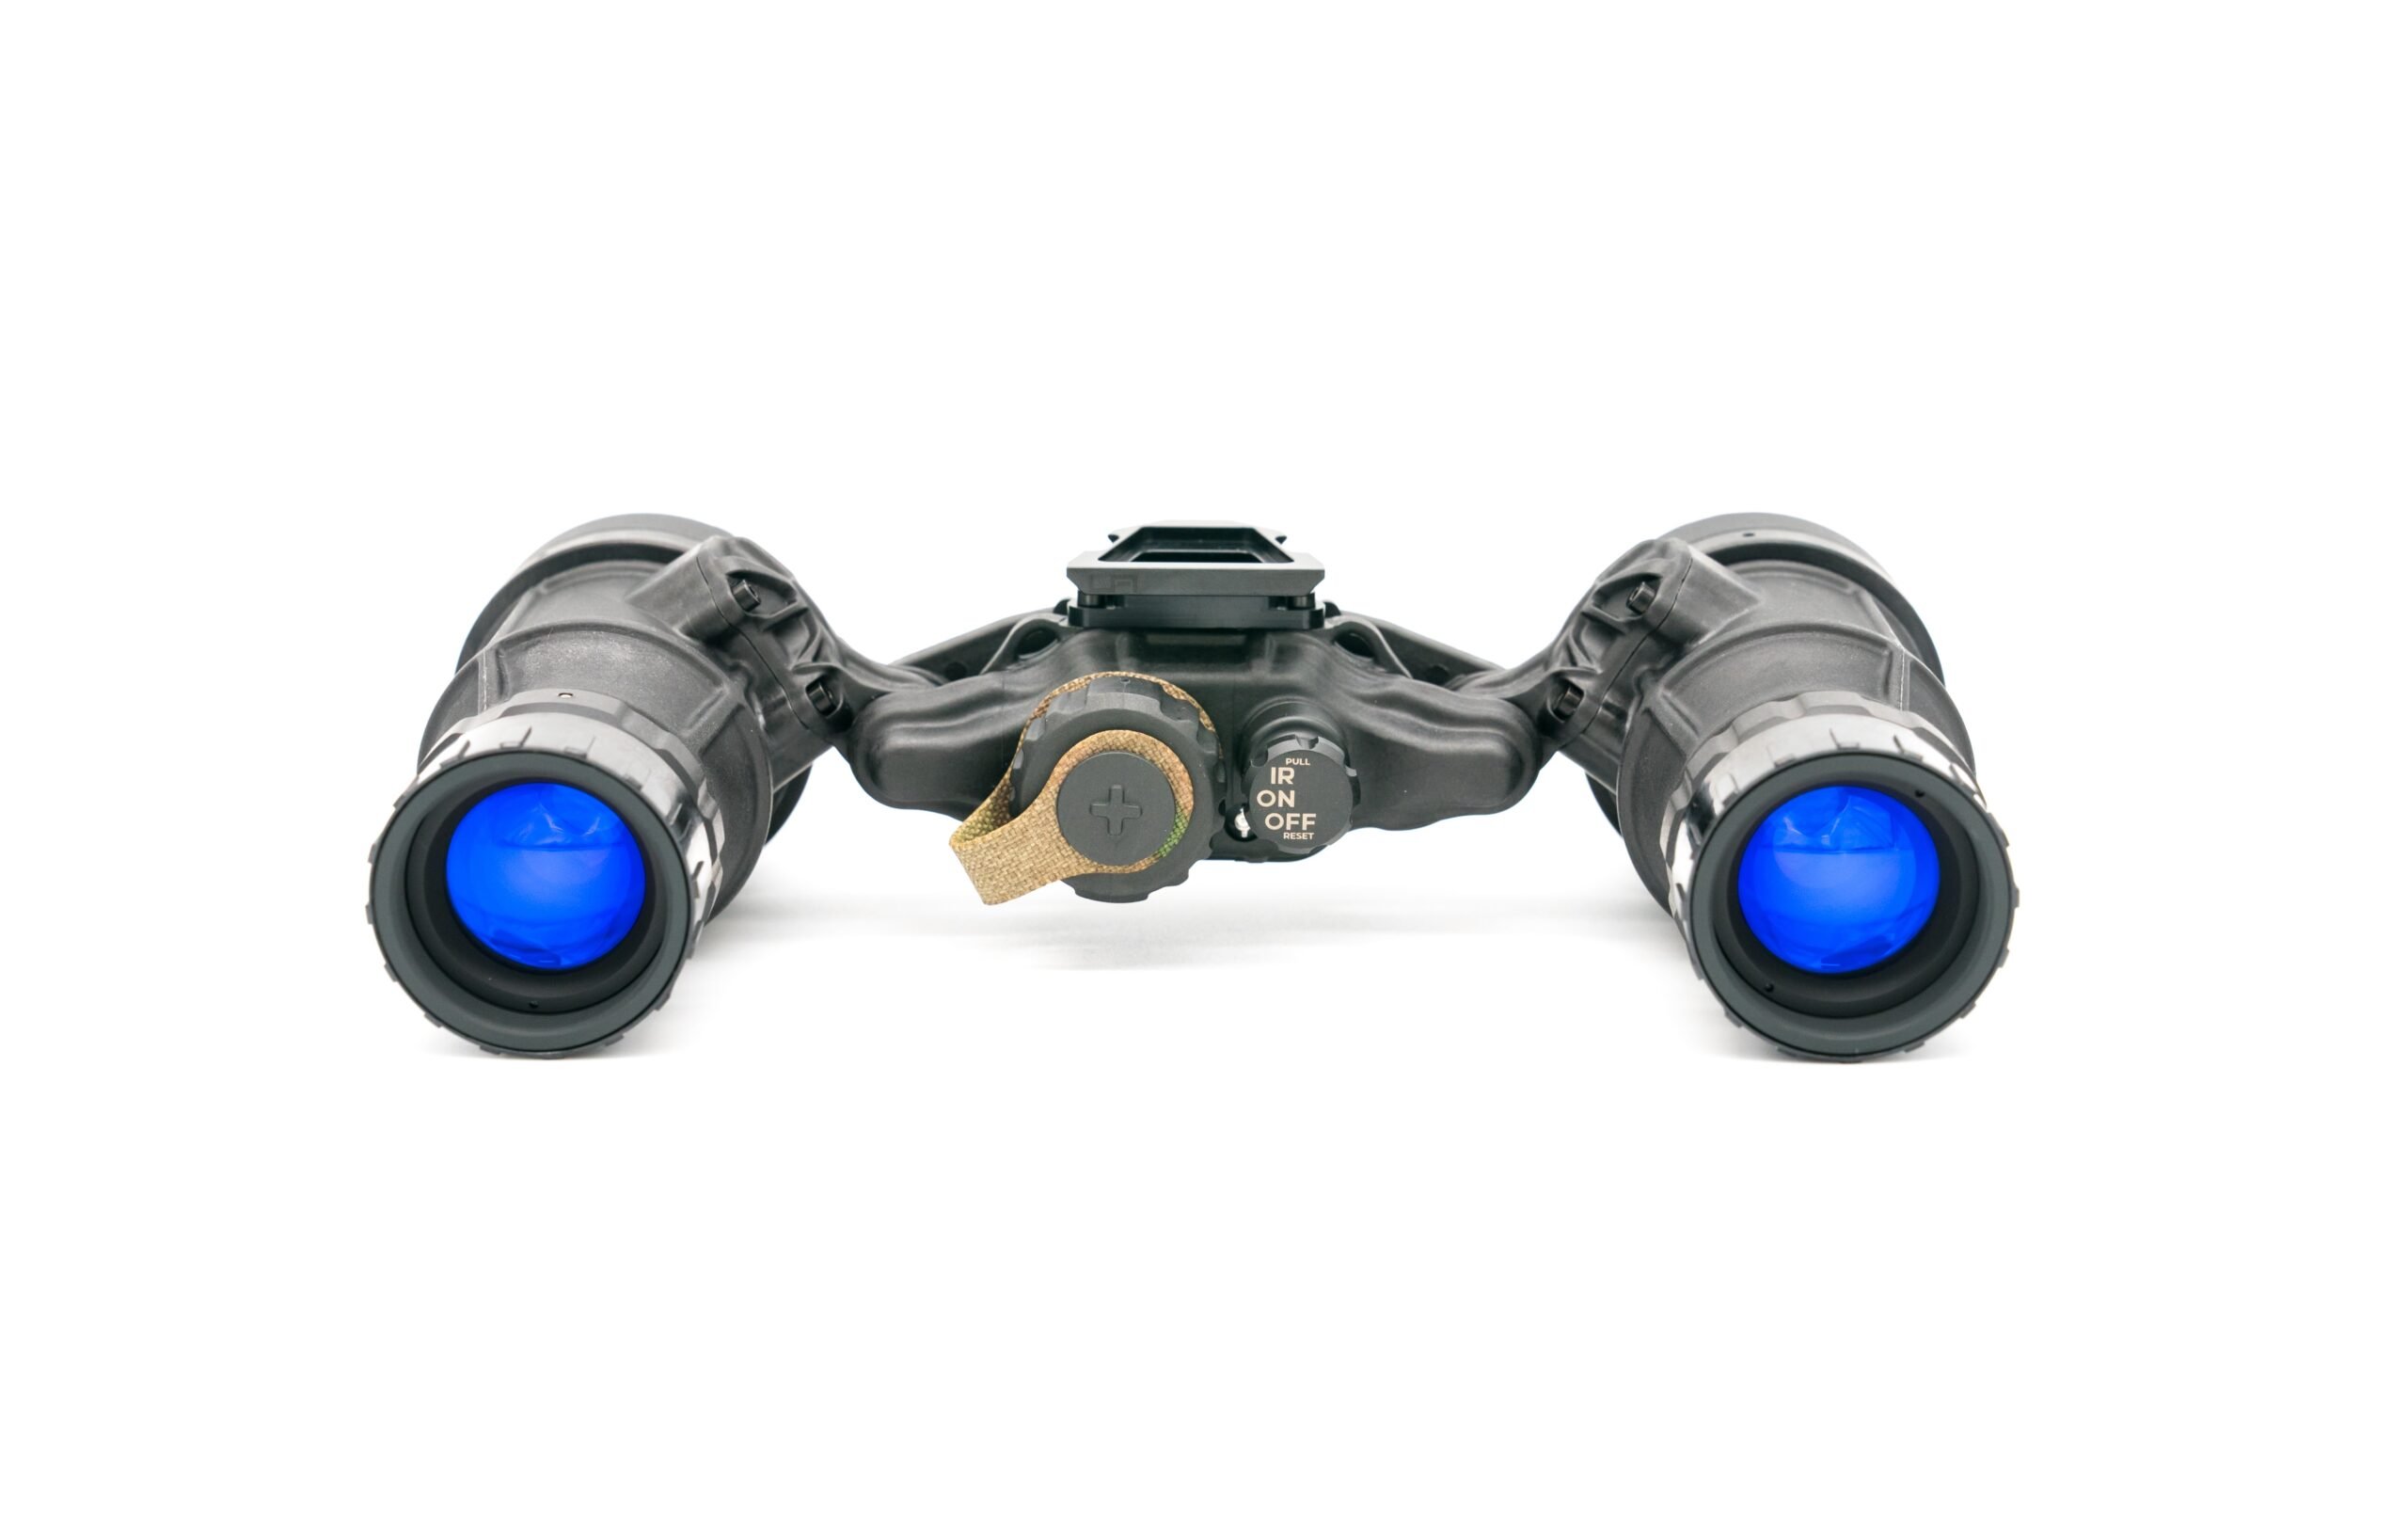 DTNVS - (Dual Tube Night Vision System)